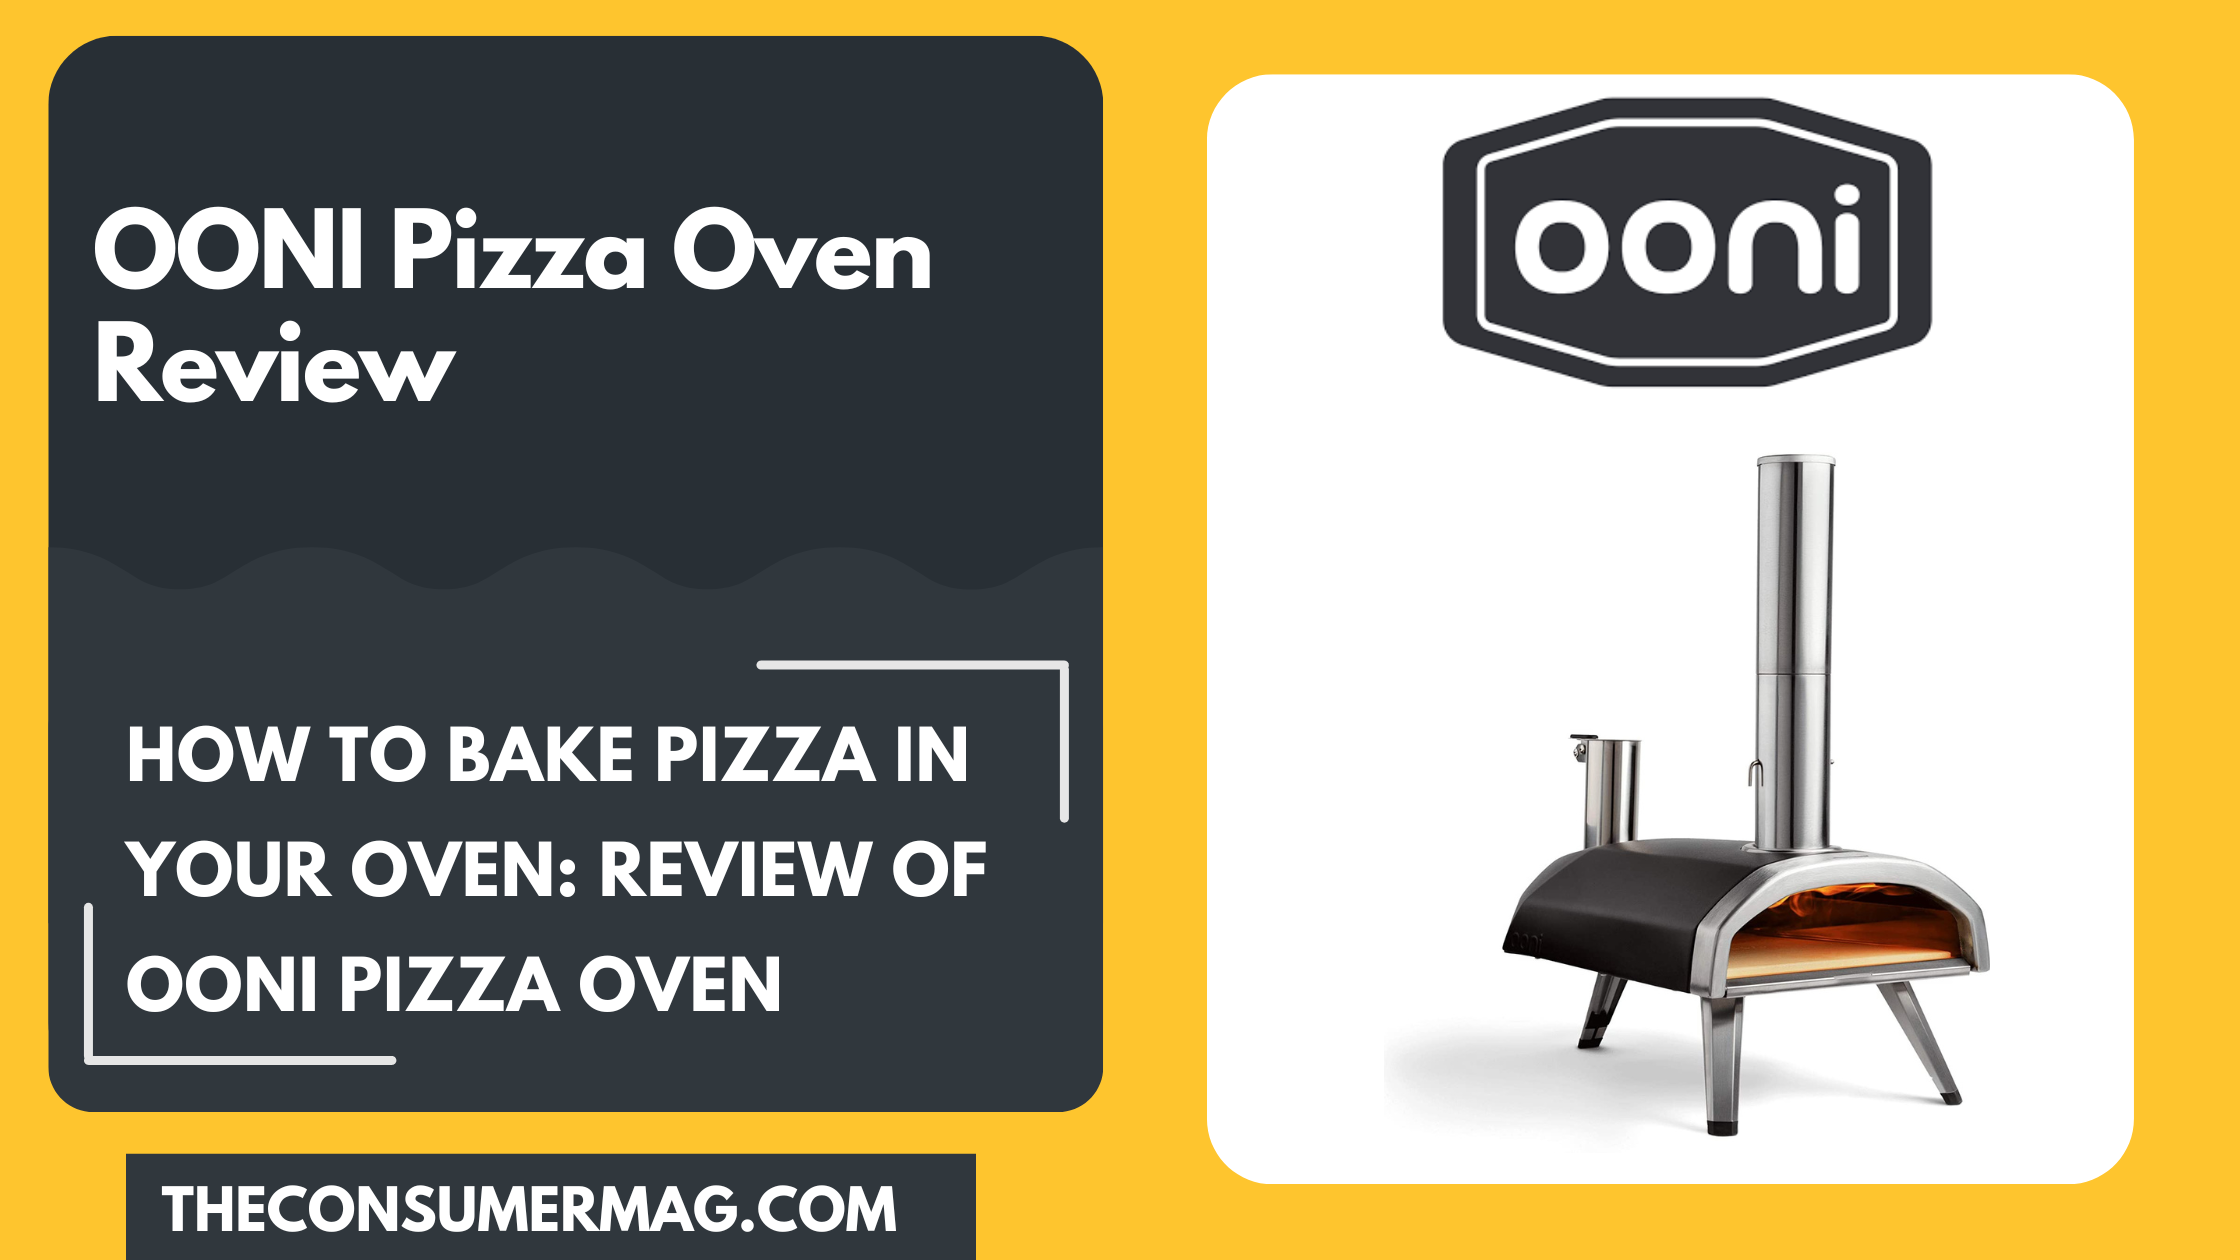 Ooni Pizza Oven featured image